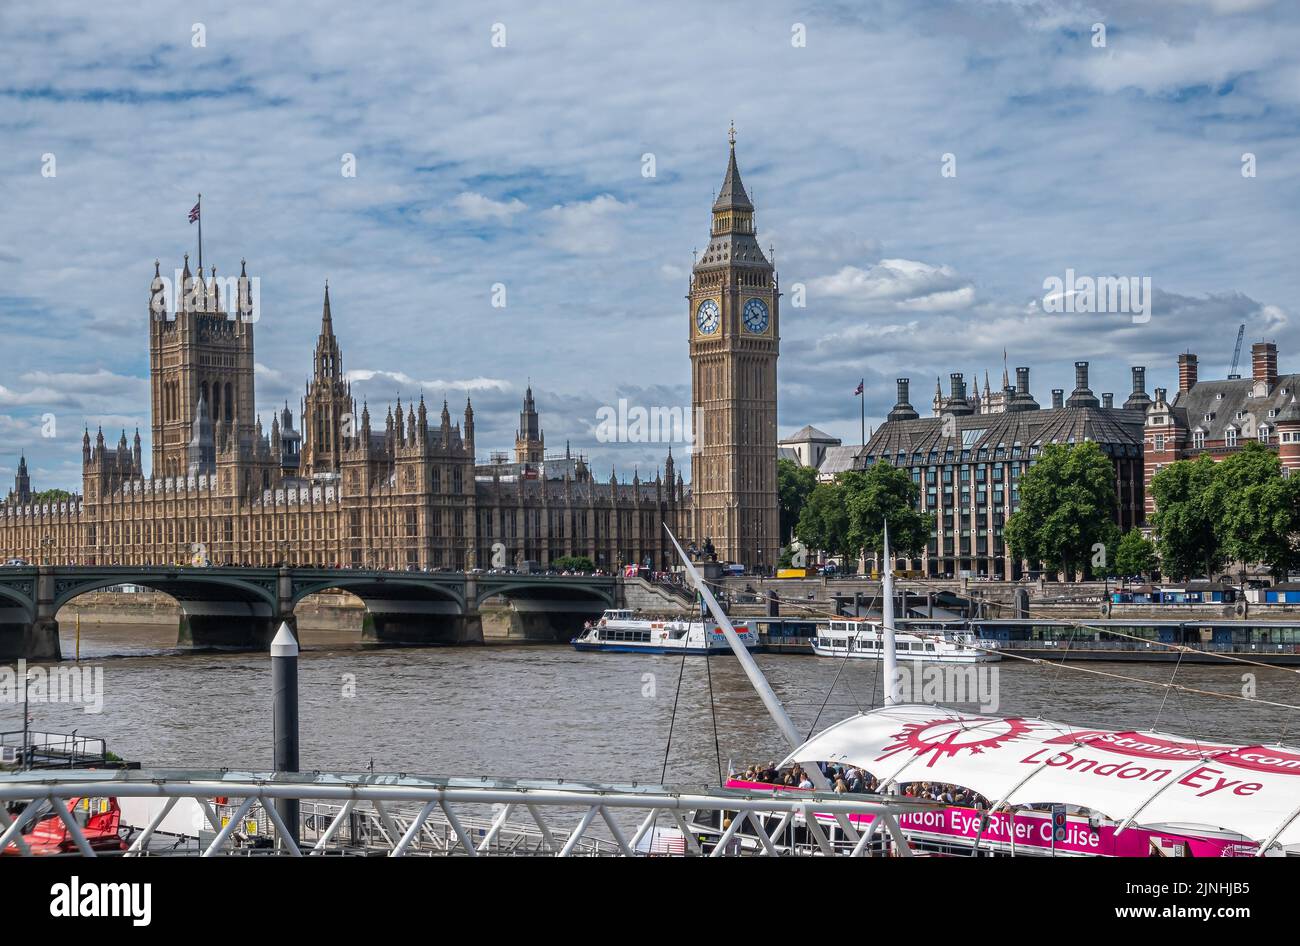 London, UK - July 4, 2022: London Eye cruise boat on Thames river with Westminster Palace, bridge and Big Ben in back under blue cloudscape. Other bui Stock Photo